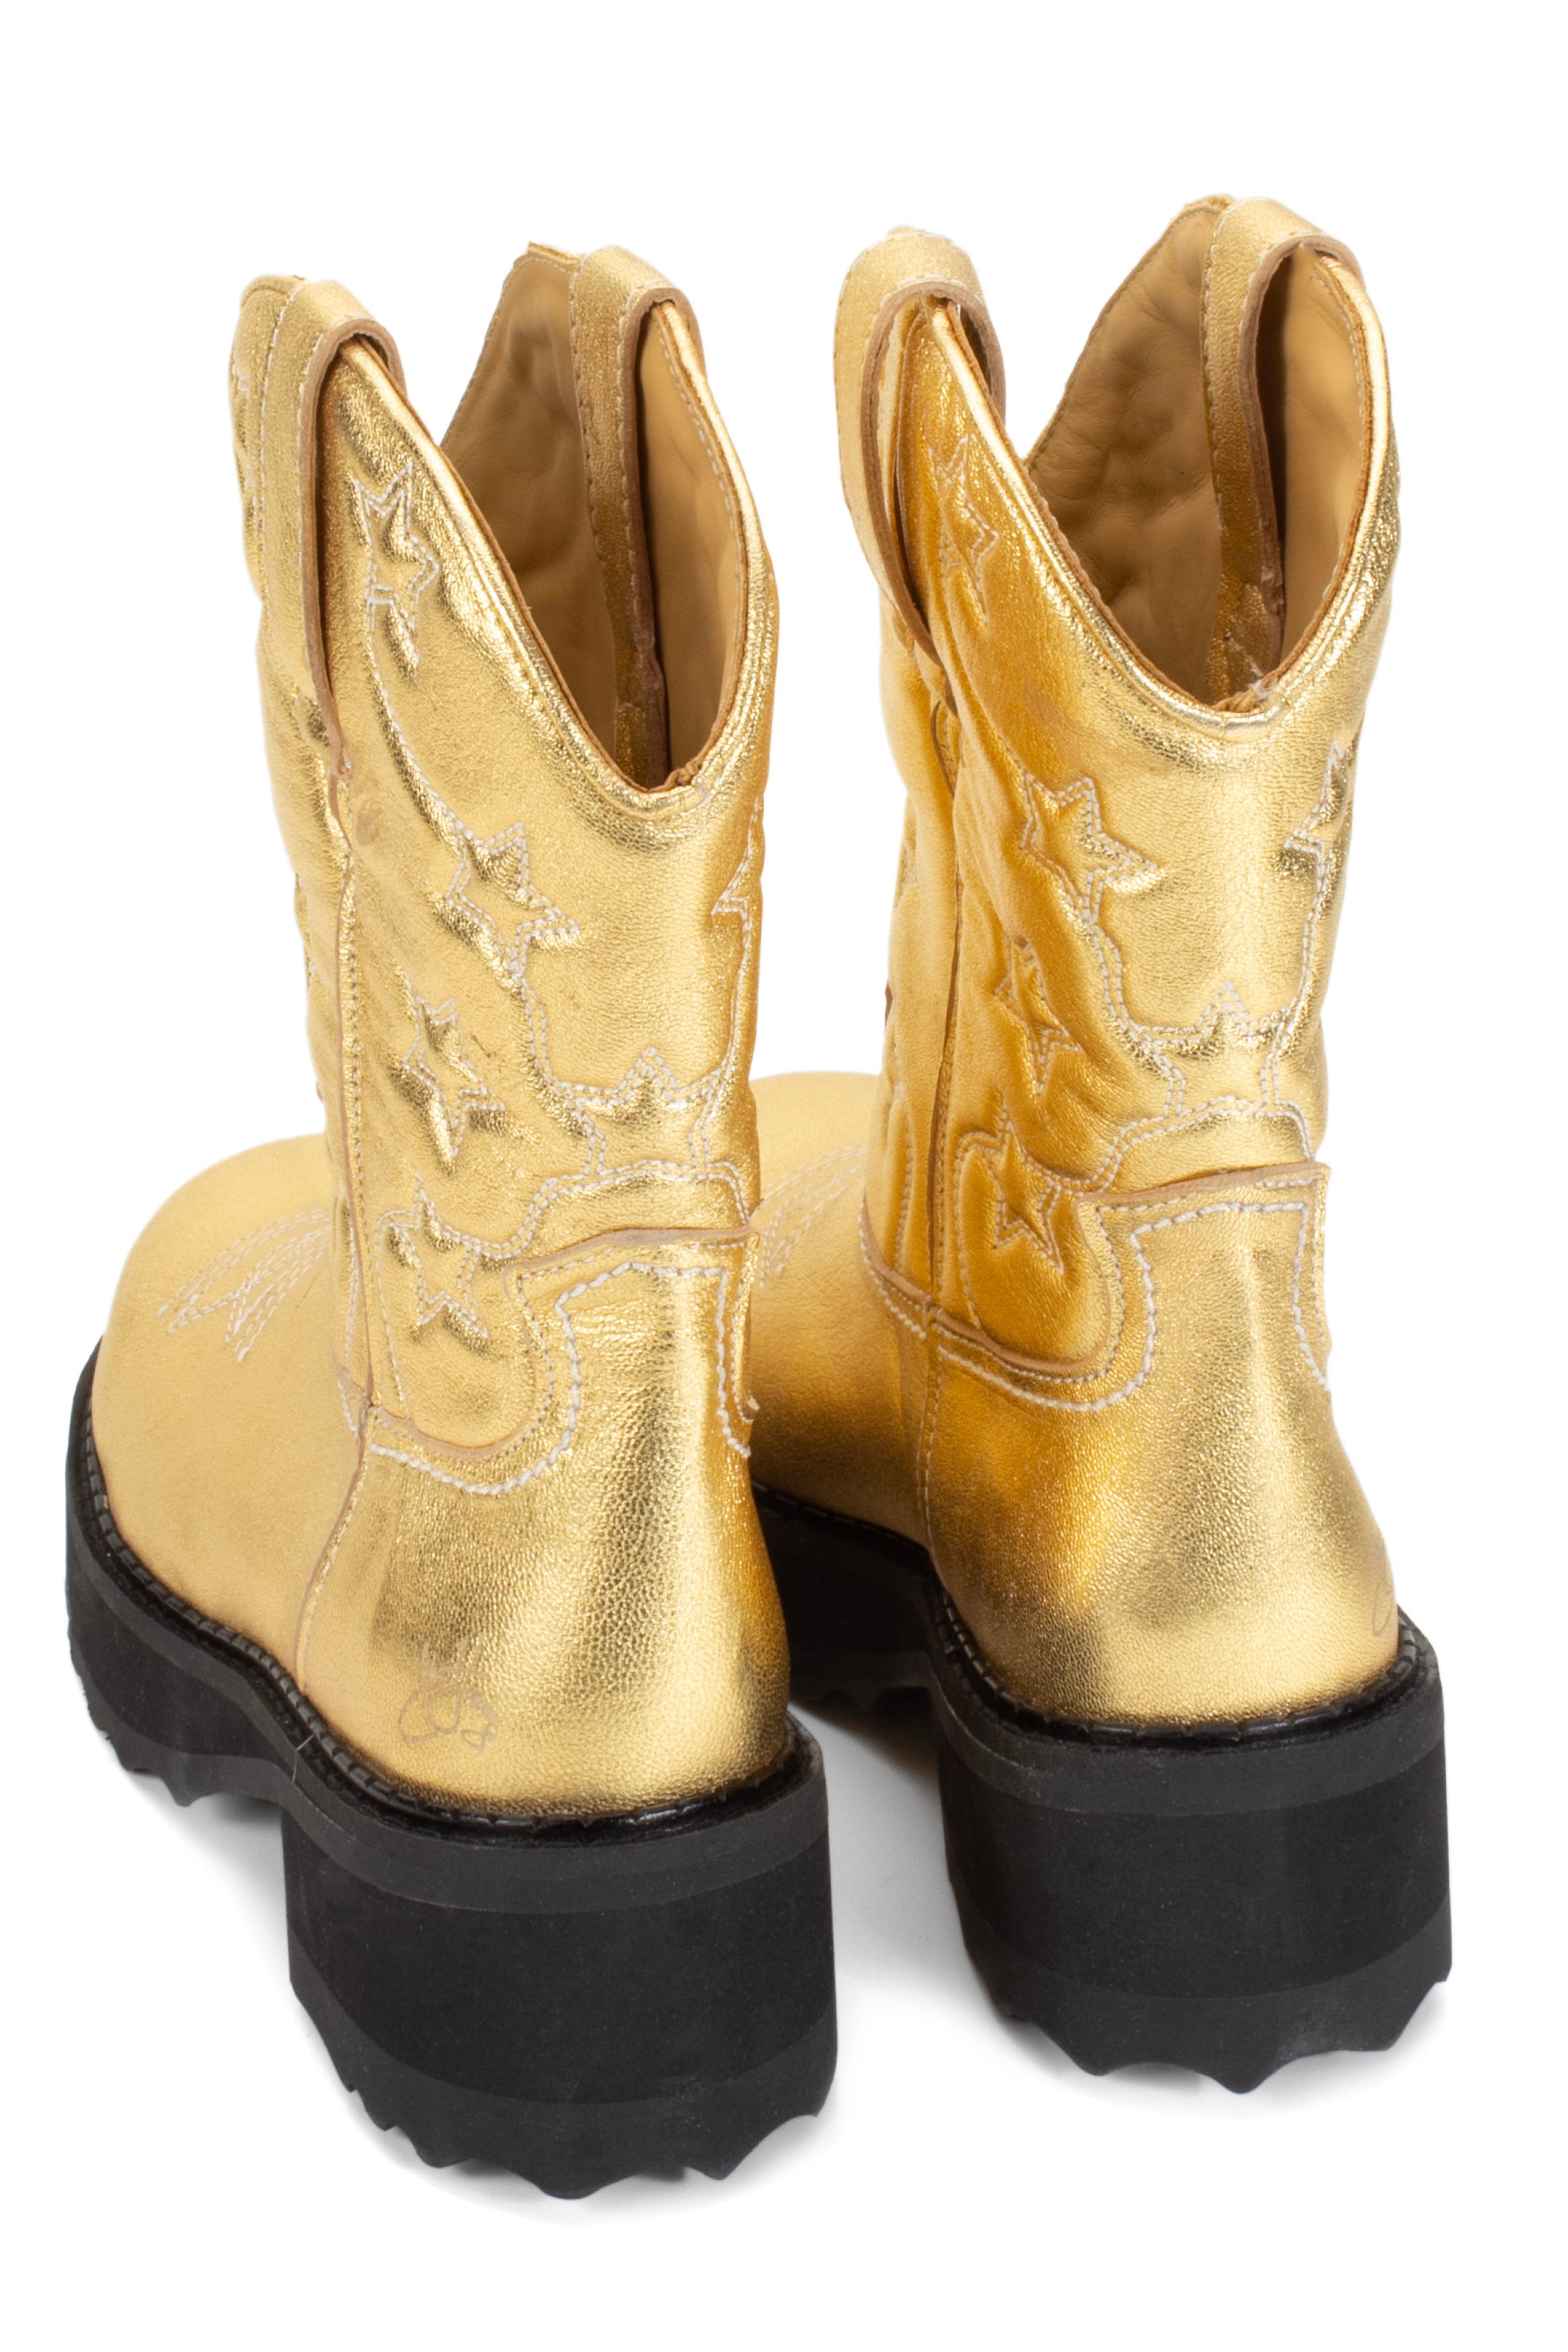 Western-style appearance, engraved lone stars front and back, boots have a high black sole and are signed by John Fluevog